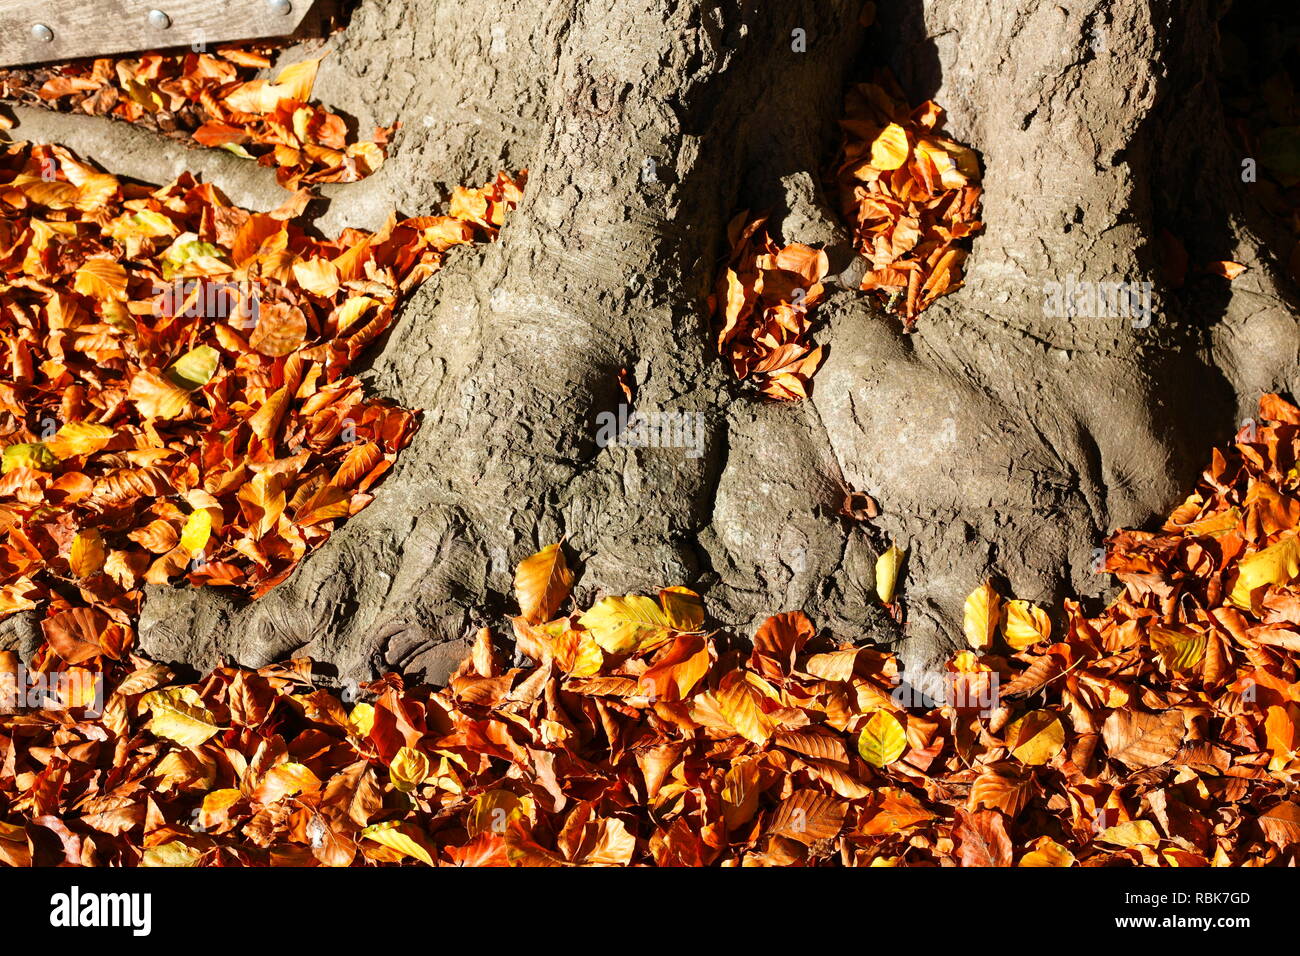 Old gnarled tree trunk, colorful autumn leaves lying on the floor, Germany, Europe I Alter knorriger Baumstamm, buntes Herbstlaub auf dem Boden liegen Stock Photo